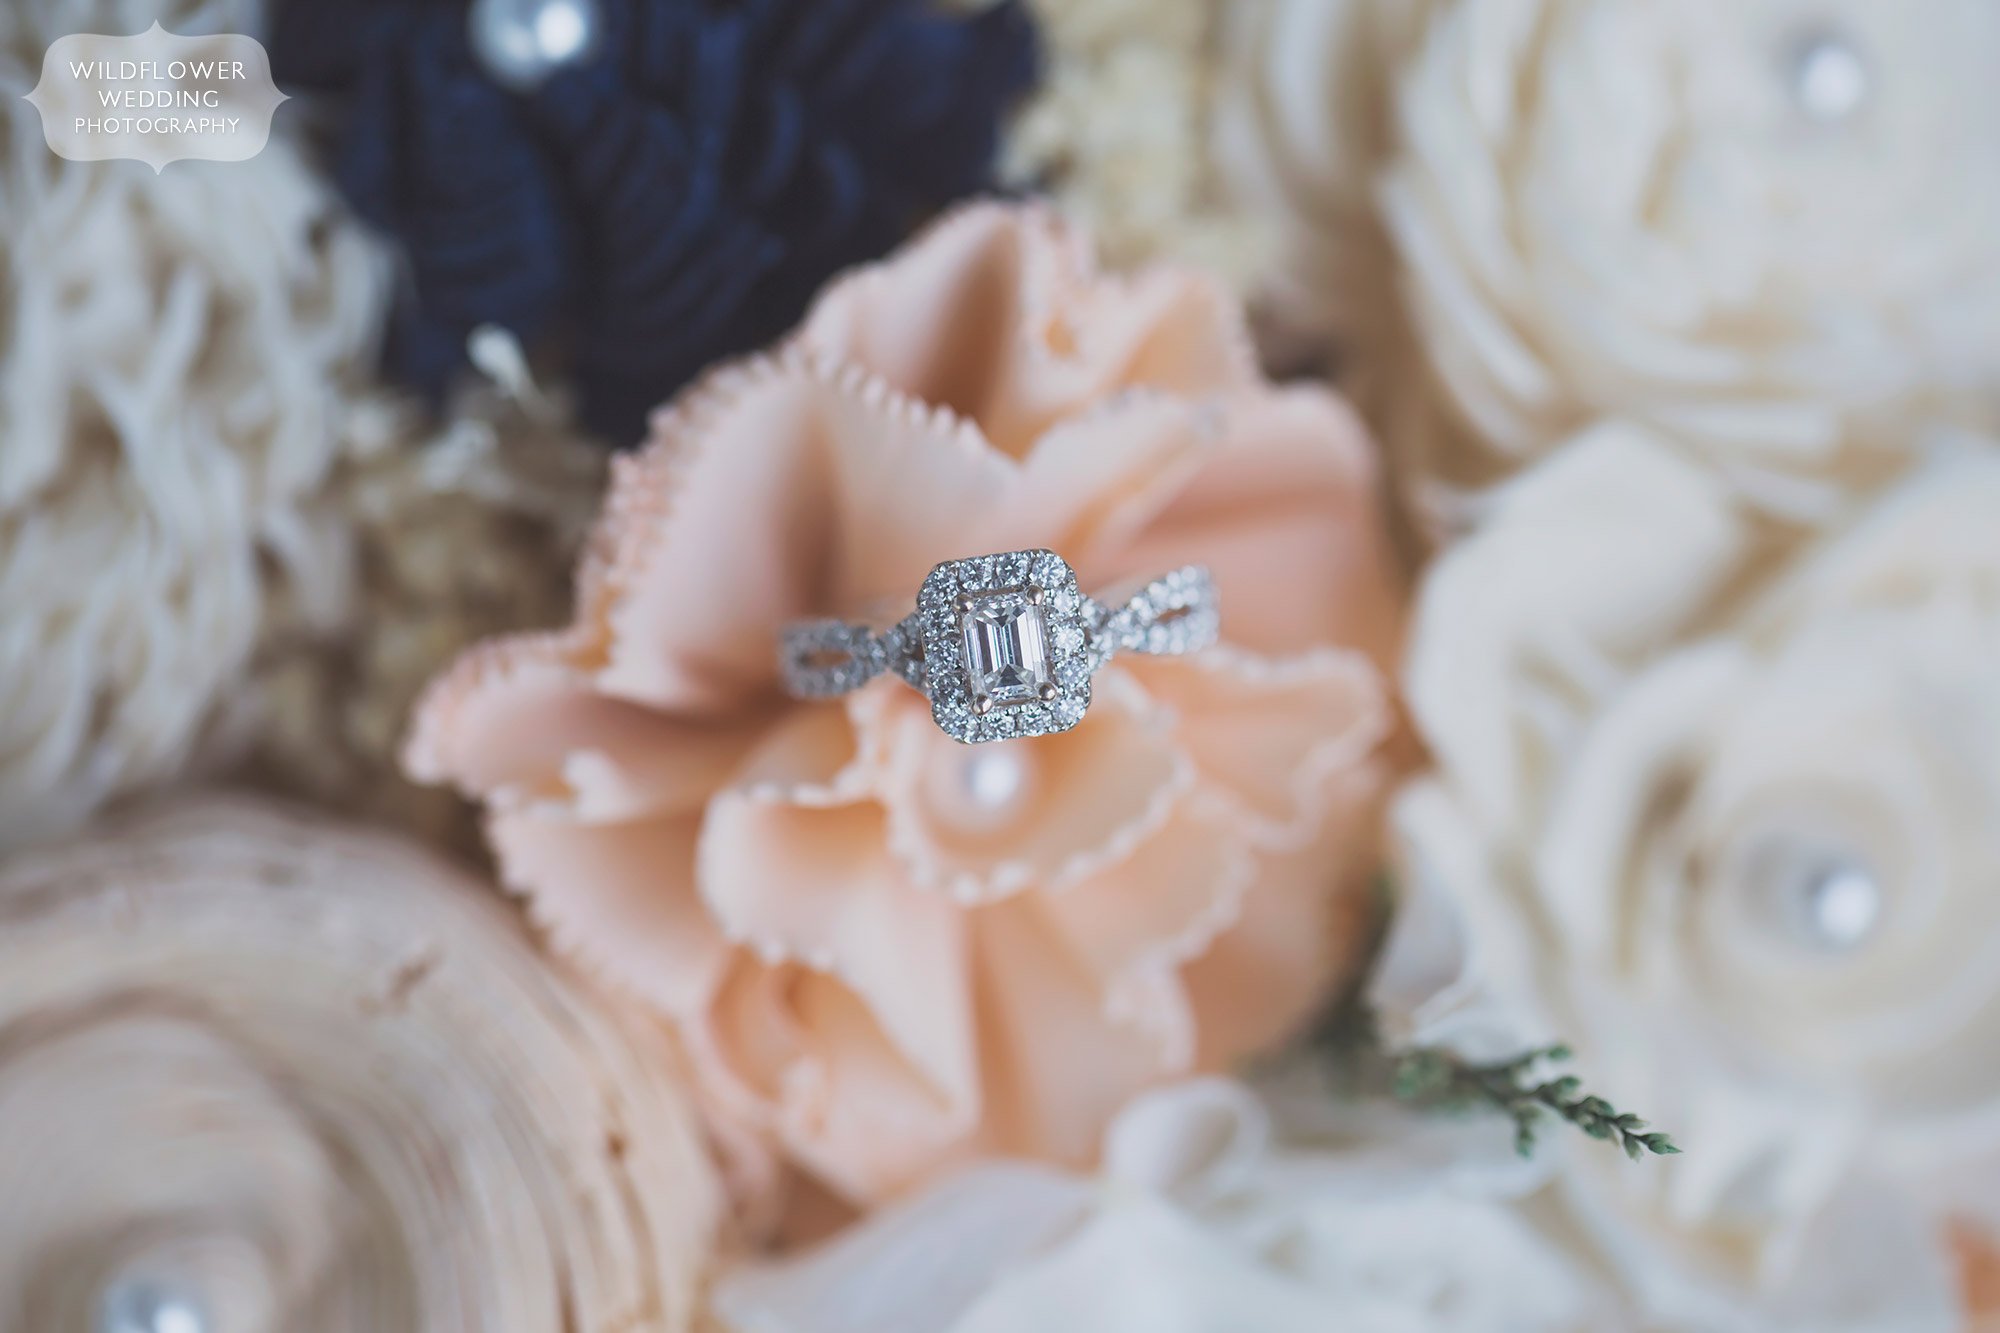 Country wedding engagement ring photo on a wooden flower bouquet.